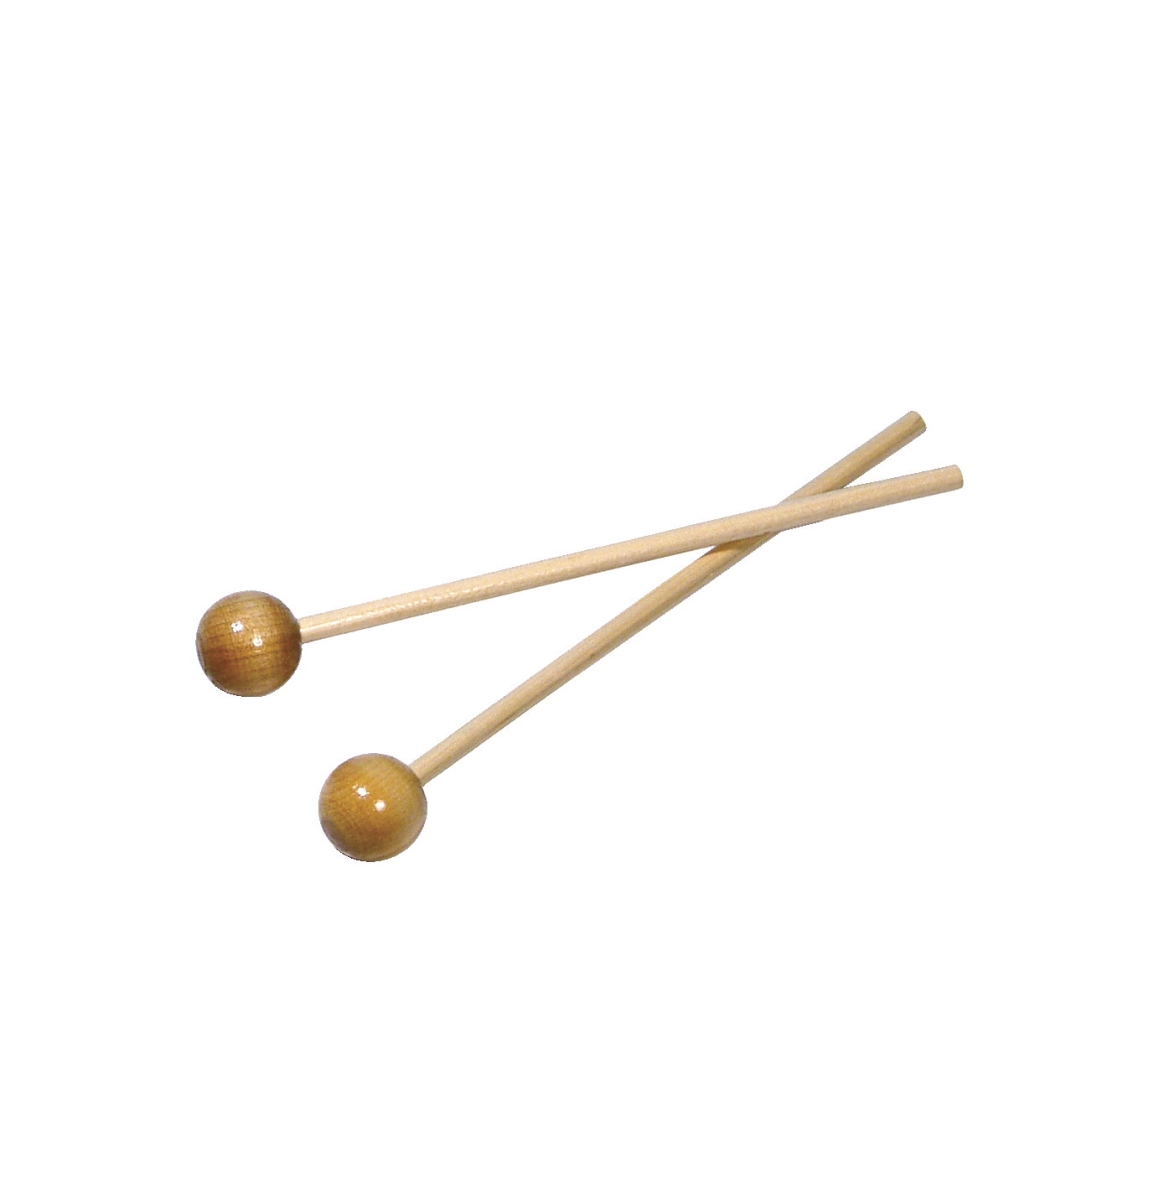 Picture of Delta Education 131-5307 Wooden Mallets - Pack of 2